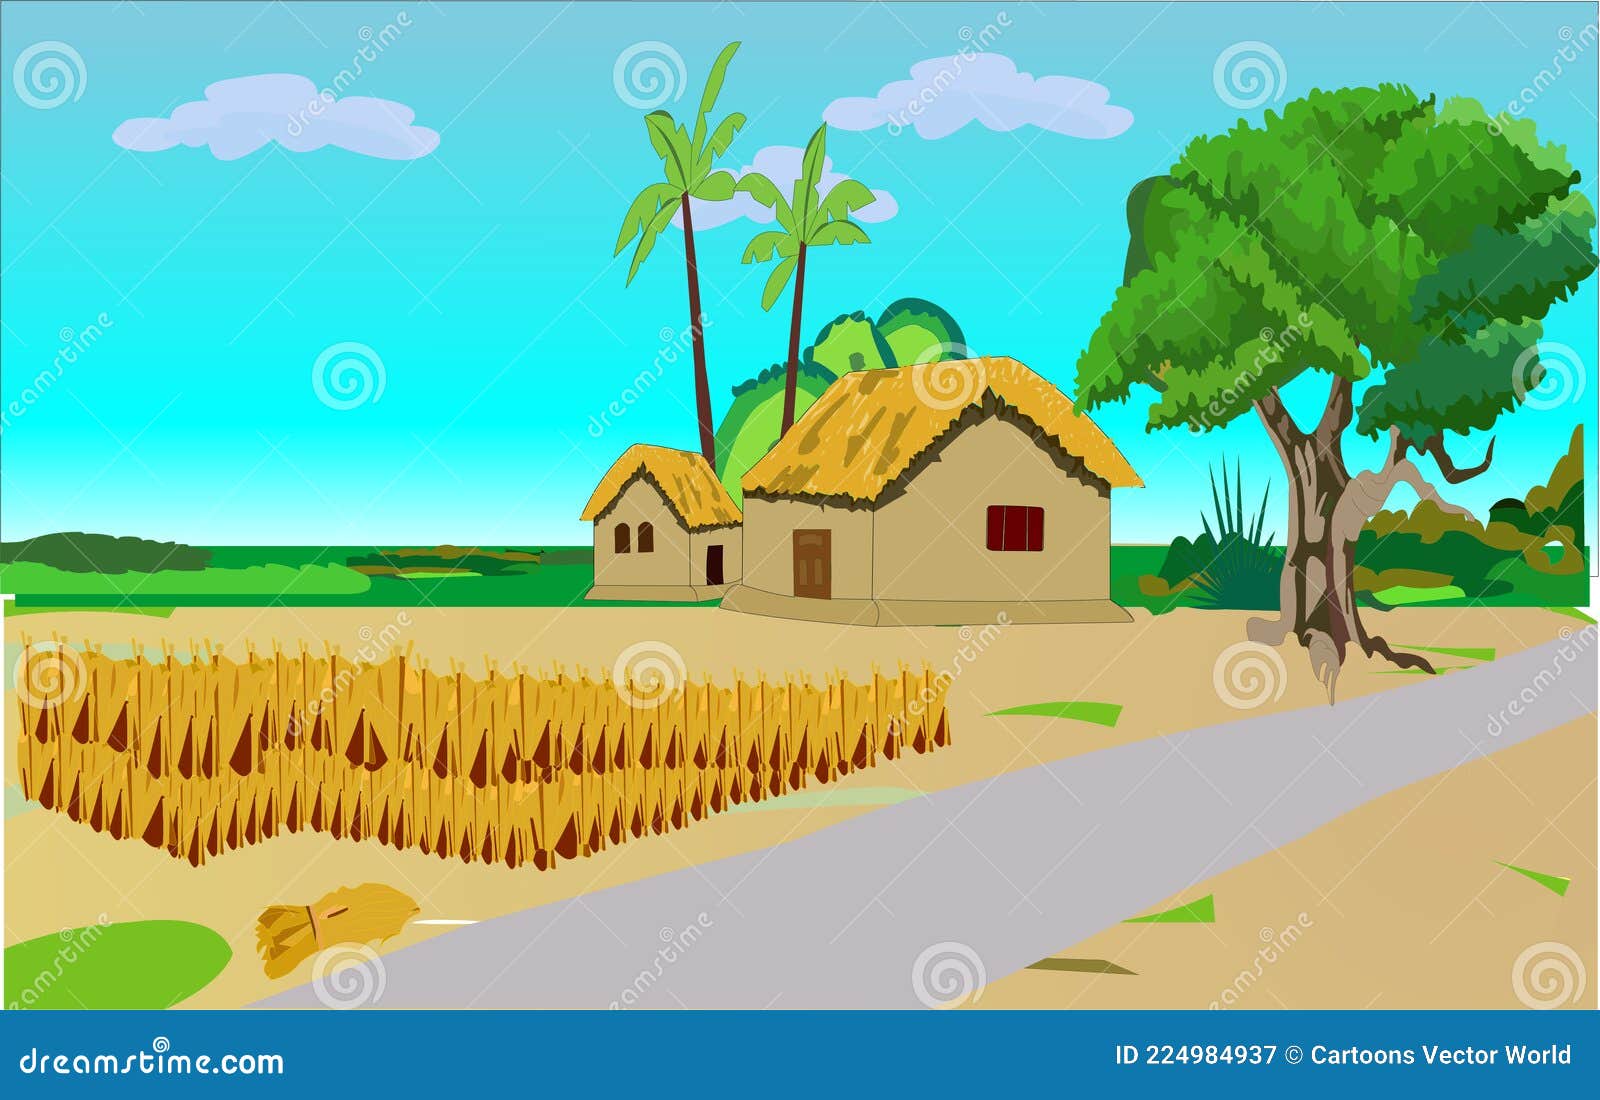 Two Houses Village Cartoon Background Vector Artwork Stock Vector -  Illustration of grass, wheat: 224984937